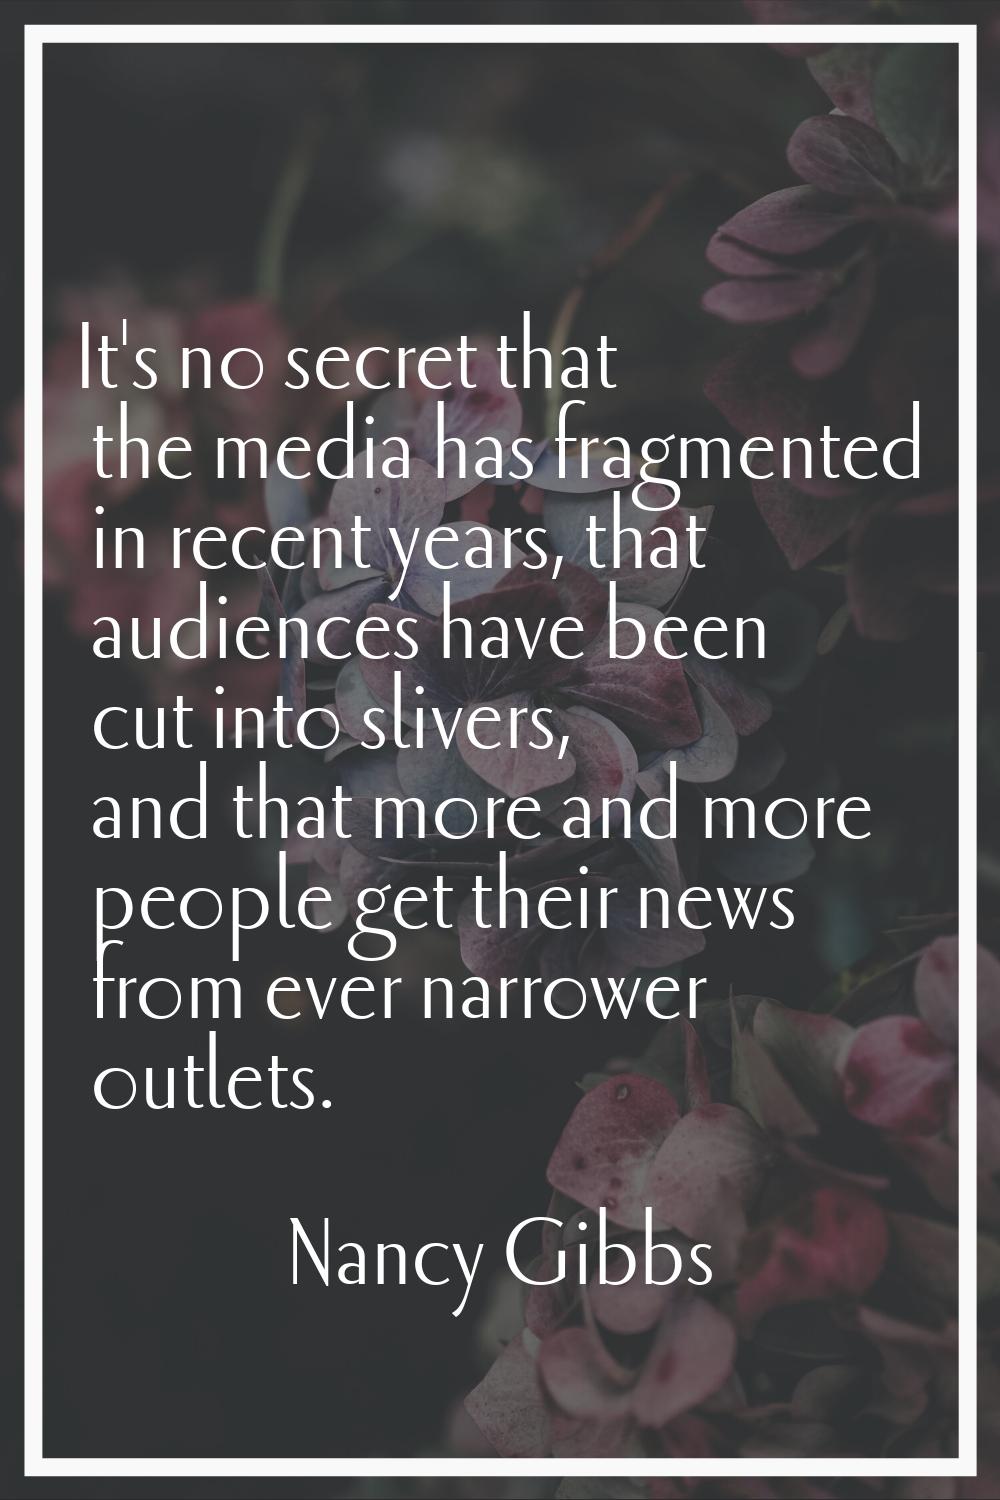 It's no secret that the media has fragmented in recent years, that audiences have been cut into sli